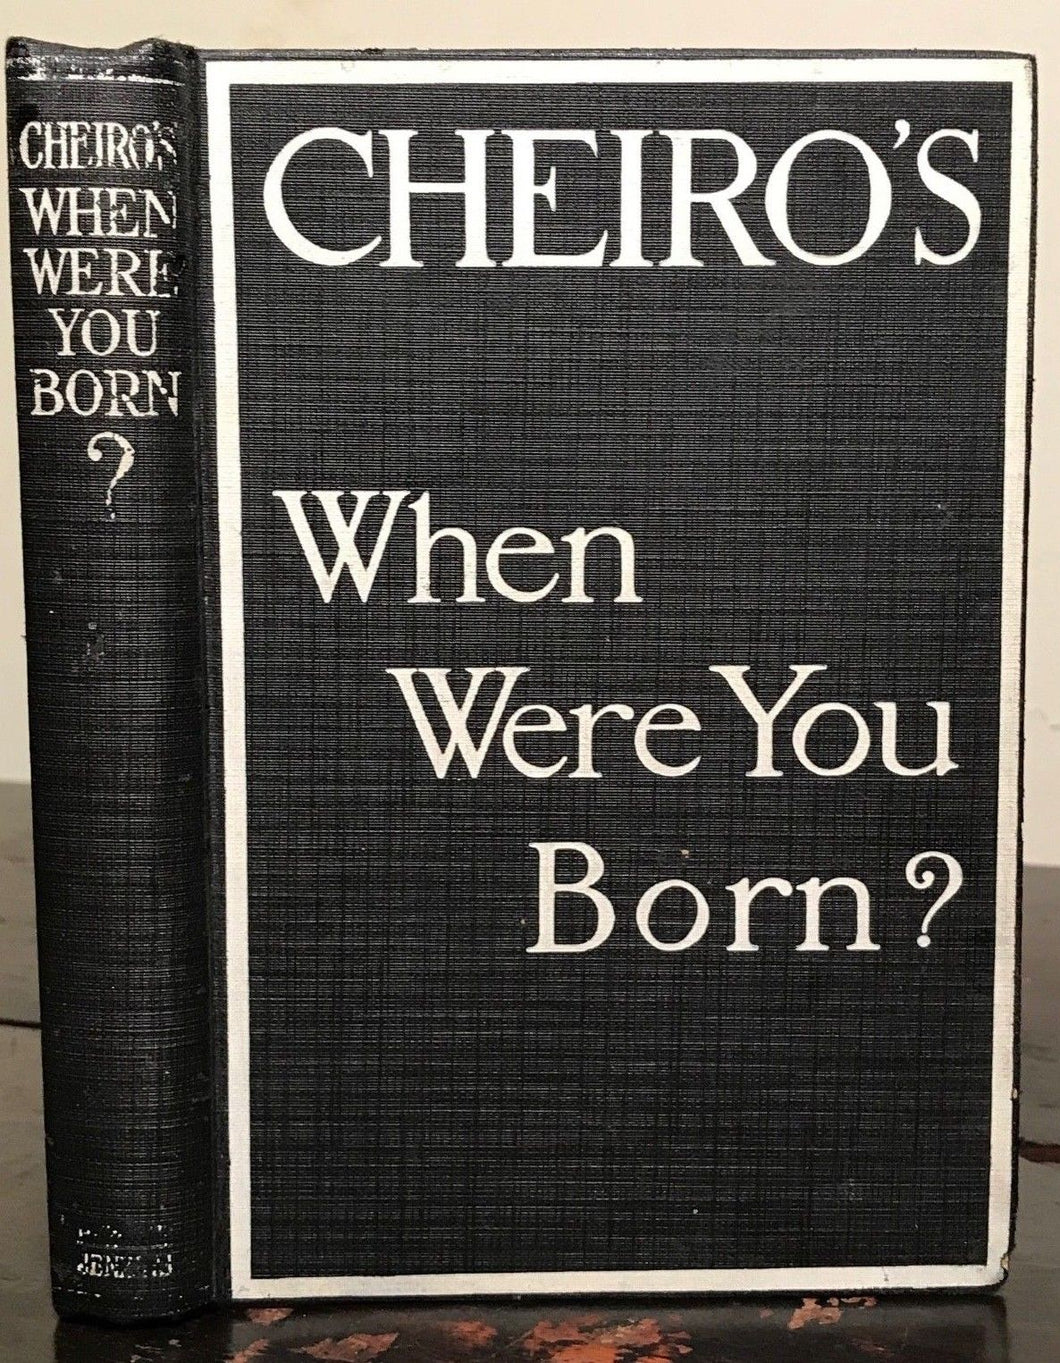 WHEN WERE YOU BORN? - CHEIRO, 1st/1st, 1914 - Astrology, Numerology, Divination